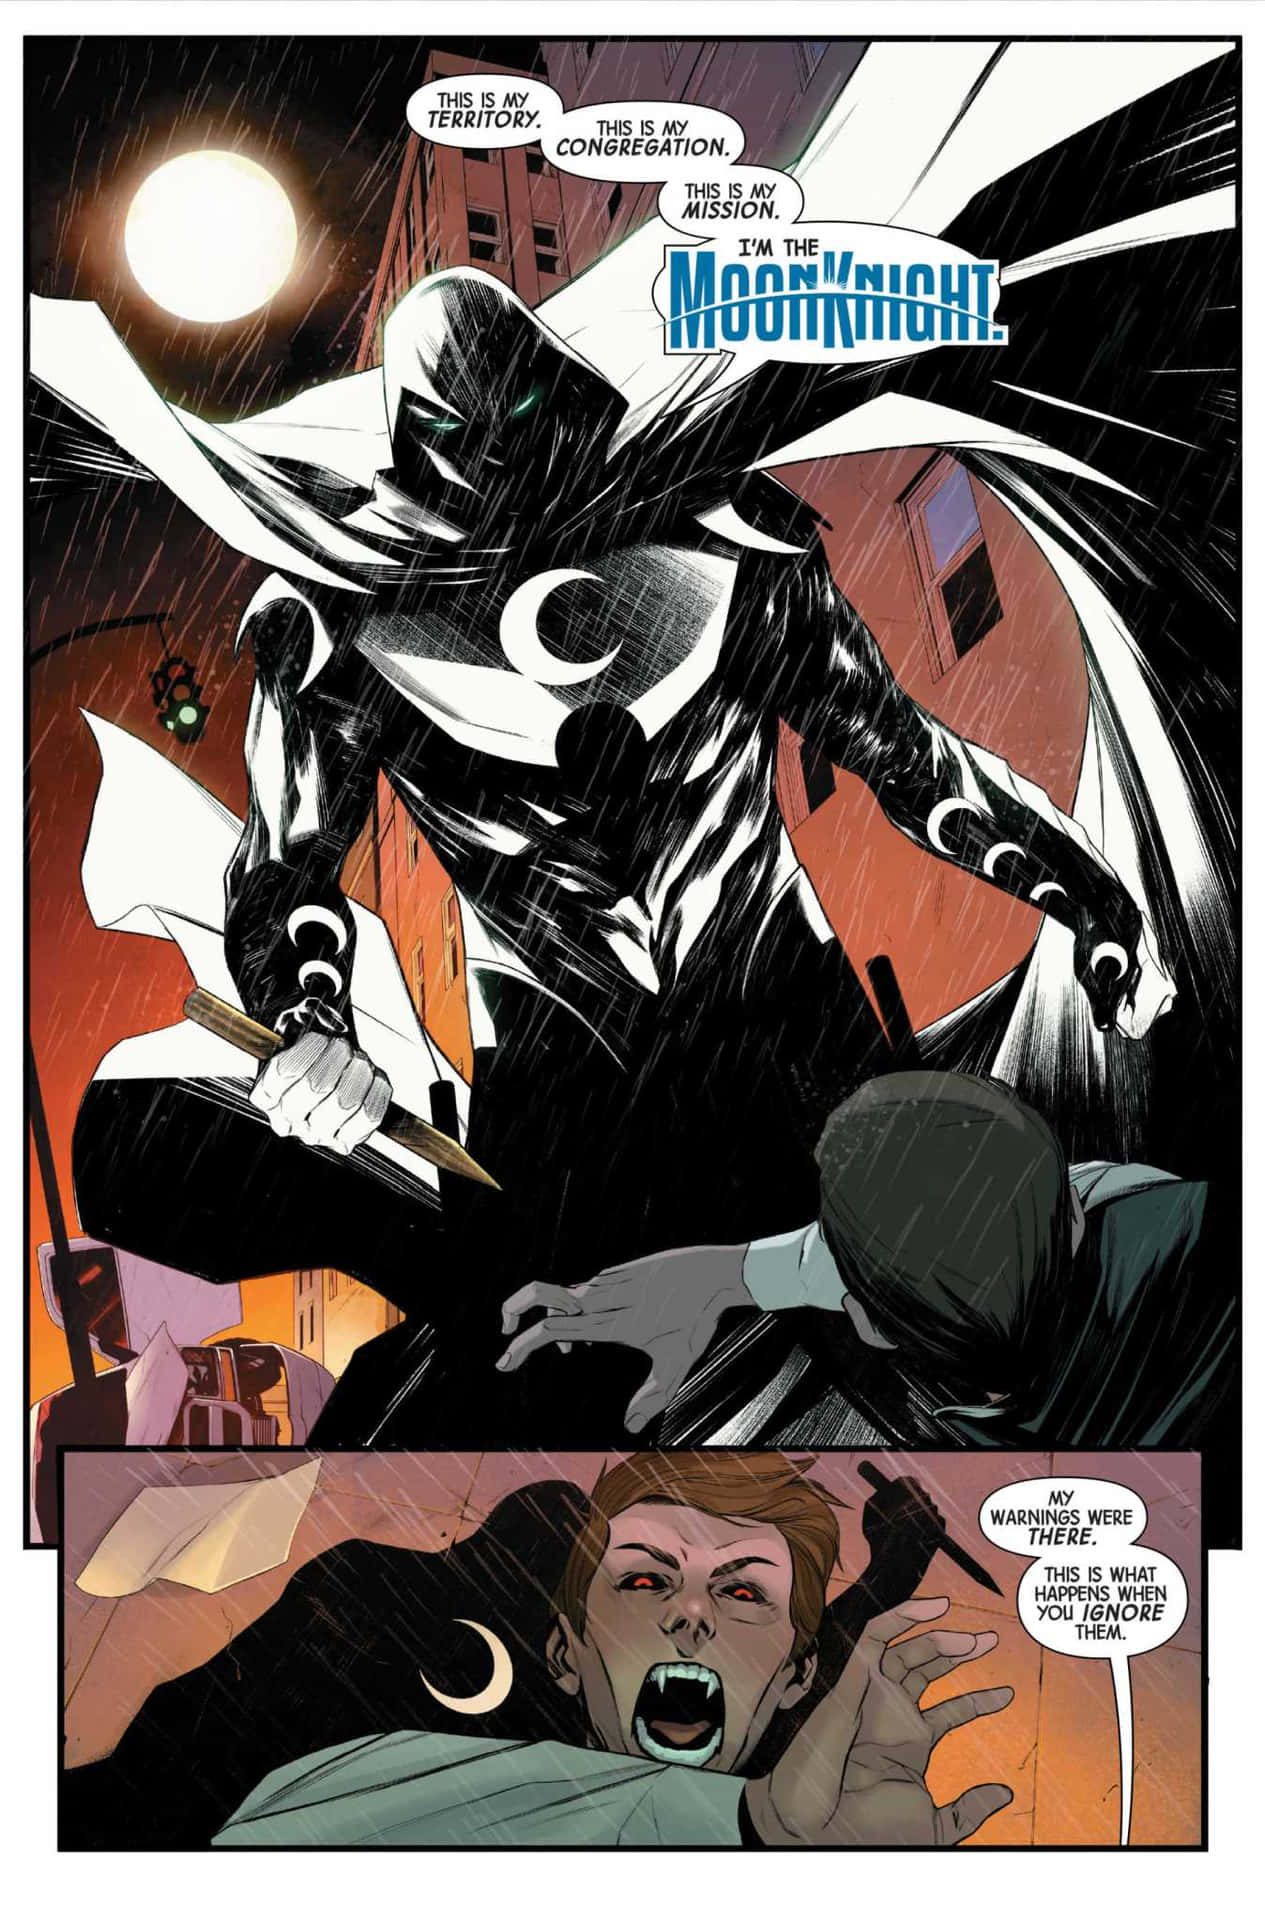 Moon Knight courageous and determined